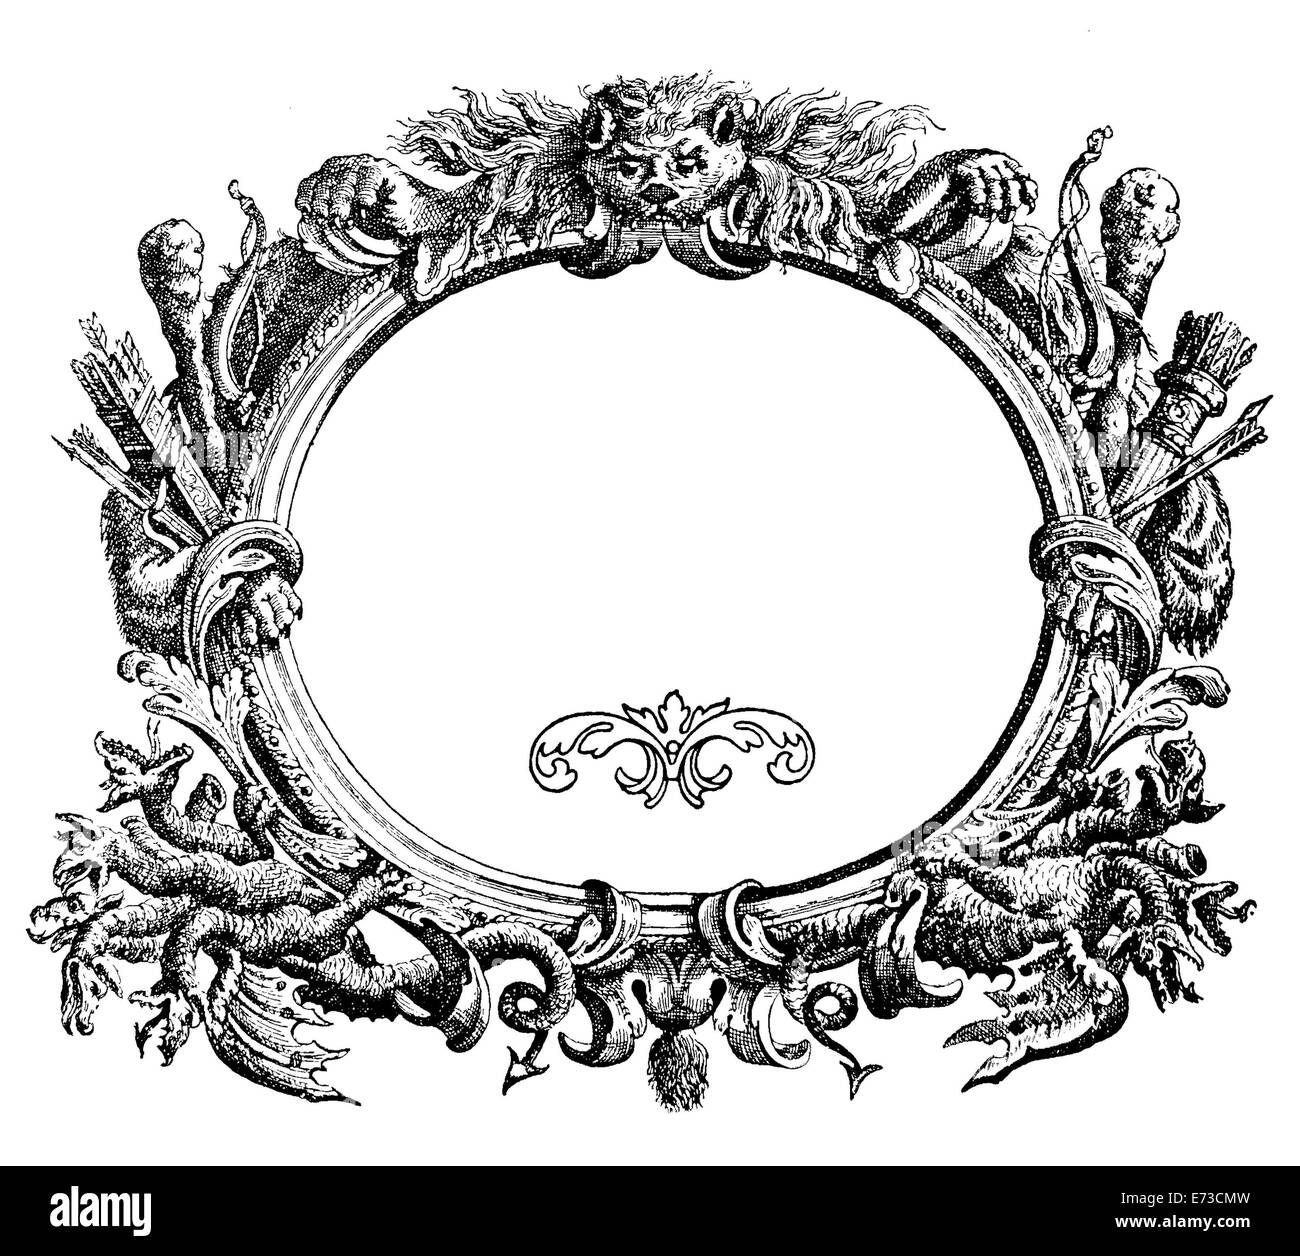 Renaissance ornamental frame with wild beast, arch, arrows and Hydra ...